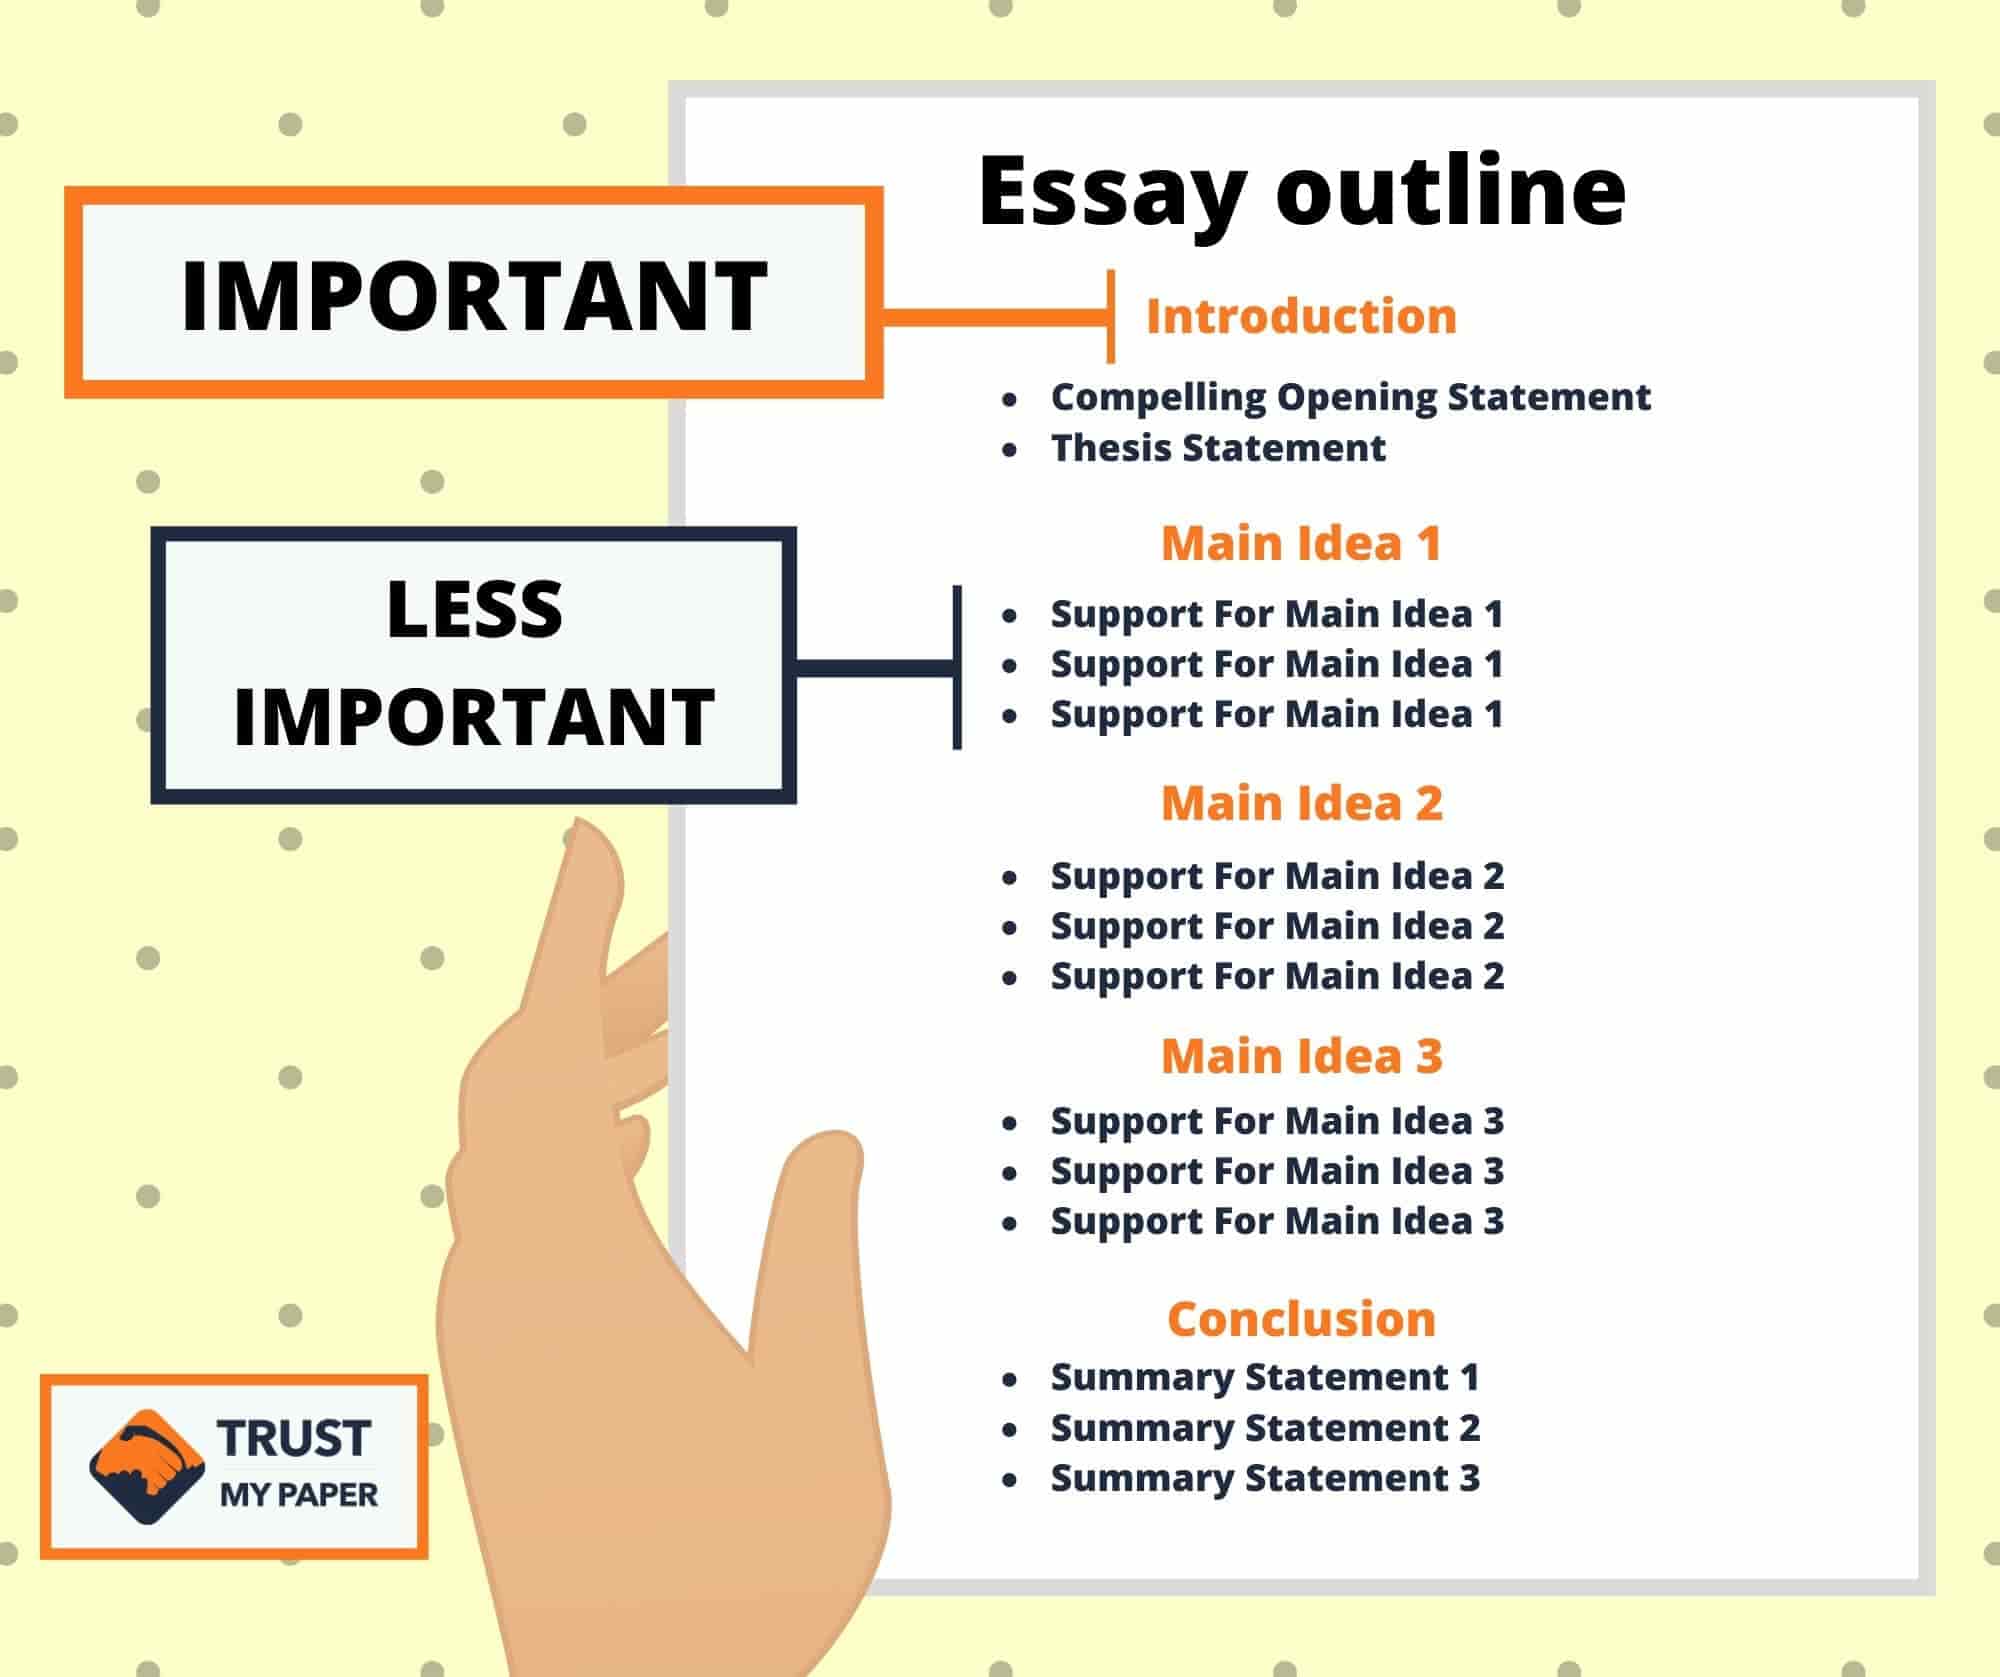 write an outline for an essay